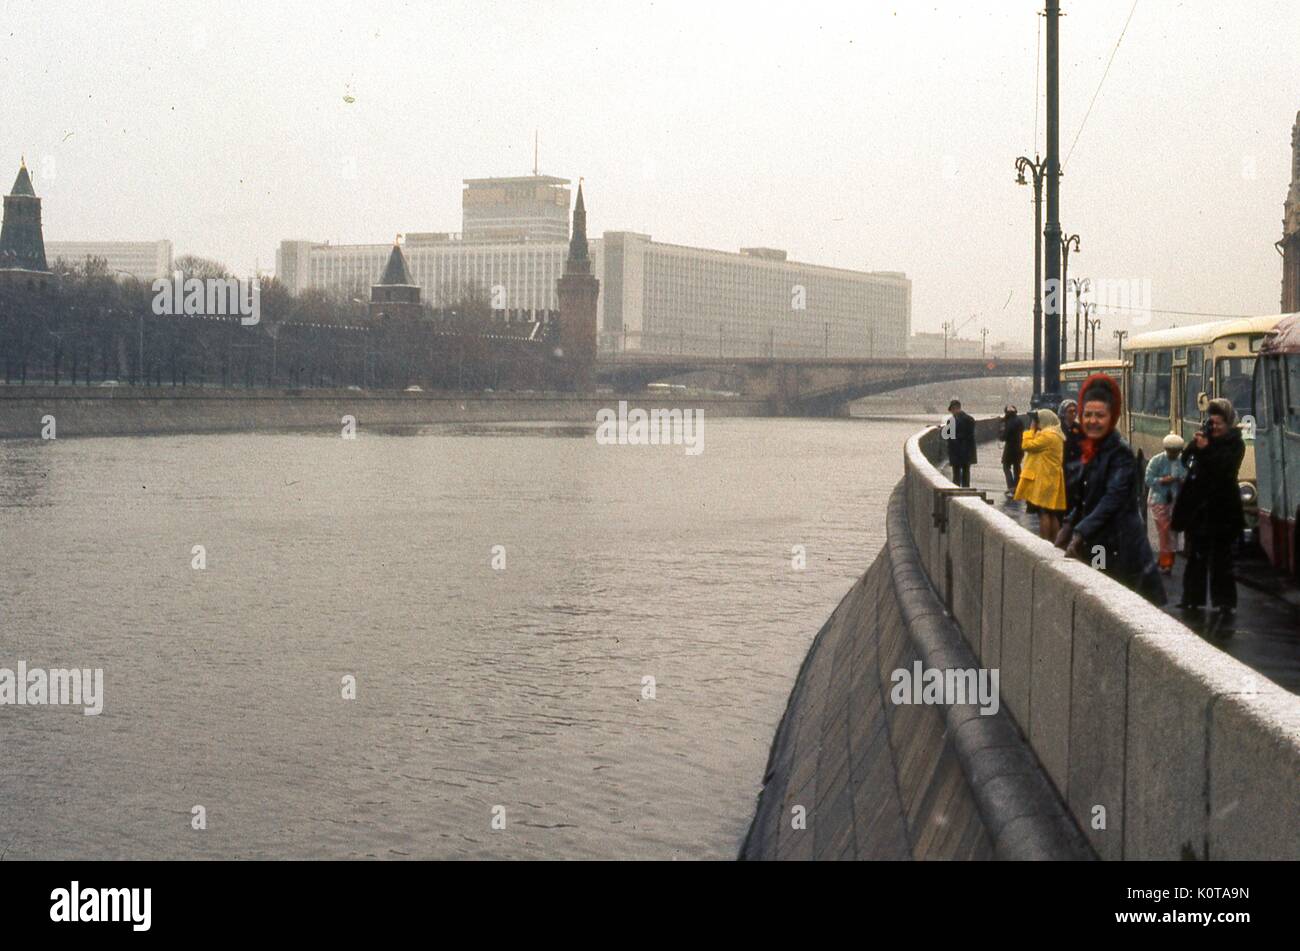 View facing east of the Rossiya Hotel, from the Sofiyskaya embankment in Moscow, Soviet Russia, USSR, November, 1973. At the time, the Rossiya was the largest hotel in the world. At center midground is the Bolshoy Moskvoretsky Bridge spanning the Moscow River due east of the Kremlin. In the right foreground, tourists and cars traverse the roadway next to the sea wall. Along the left side is the outer wall of the Kremlin complex. Stock Photo